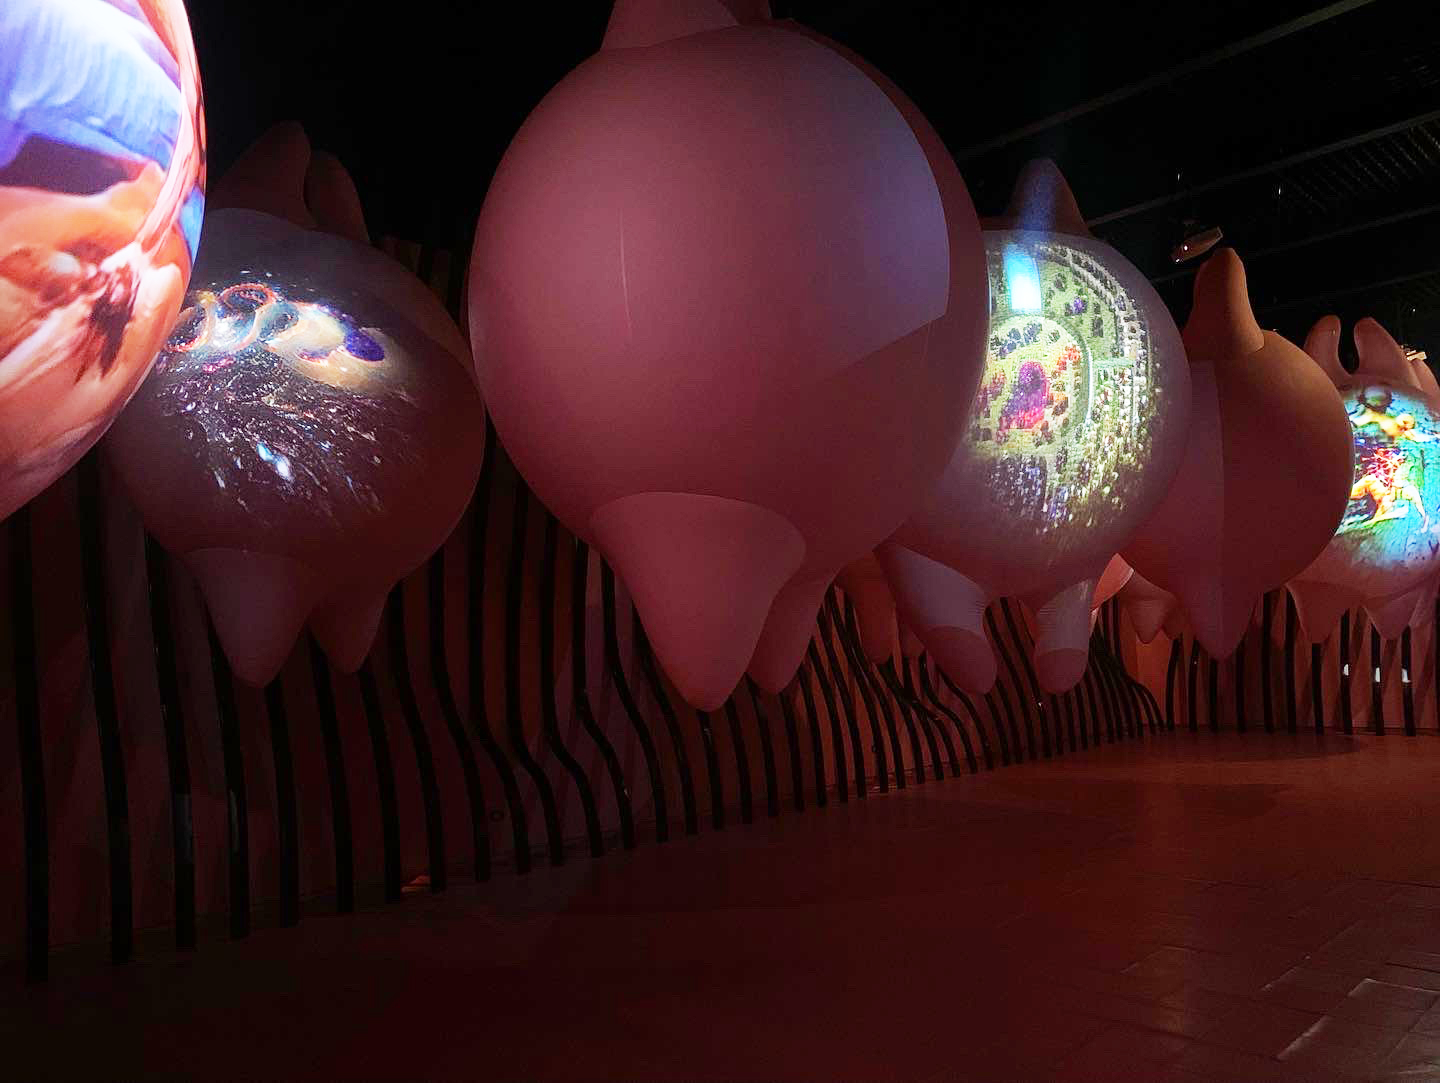 A Collection of "Womb" at the Eden-Like Garden Installation, The 59th Venice Biennale